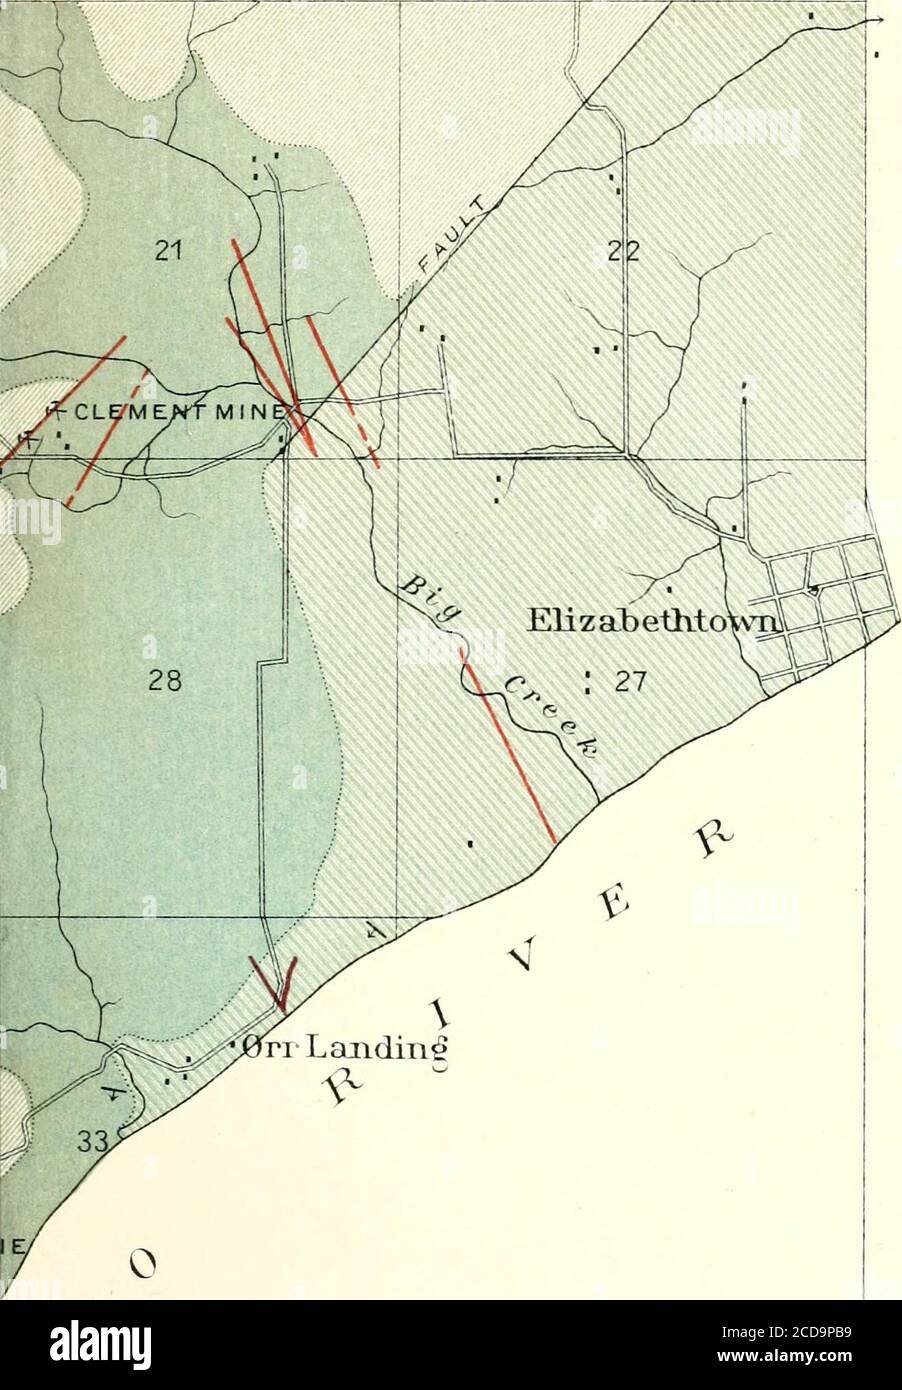 . The fluorspar deposits of southern Illinois . BULLETIN NO. 255 PL. II 8 E. frr Landing  I I GEOLOGIC MAP OF THE PvOSICLARE DISTRICTILLINOIS BY H.FOSTER BAIN. ASSISTED BYE.O.ULRICHAND A.F.CRIDER y^ Scale V-2 mile LEG EN D tL Lamprophyre / dike^ and sheets I Mansfield sandstone /sandstone and Cong torn erate / BirdsviUe.Tribuue.and C&gt;pre3s sandstone /sandstone, andshale.rhinltJ7i^stom near middle f Ste.Genevievelimestone I oolitic limestone I St.Louis limestone ( cherty limestone ) Veins Faults X Mines ^ Strike and dip JULIUS BlENa 00 LITH PAIN.] DEVONIAN AND CARBONIFEROUS ROCKS. 19 pebble Stock Photo